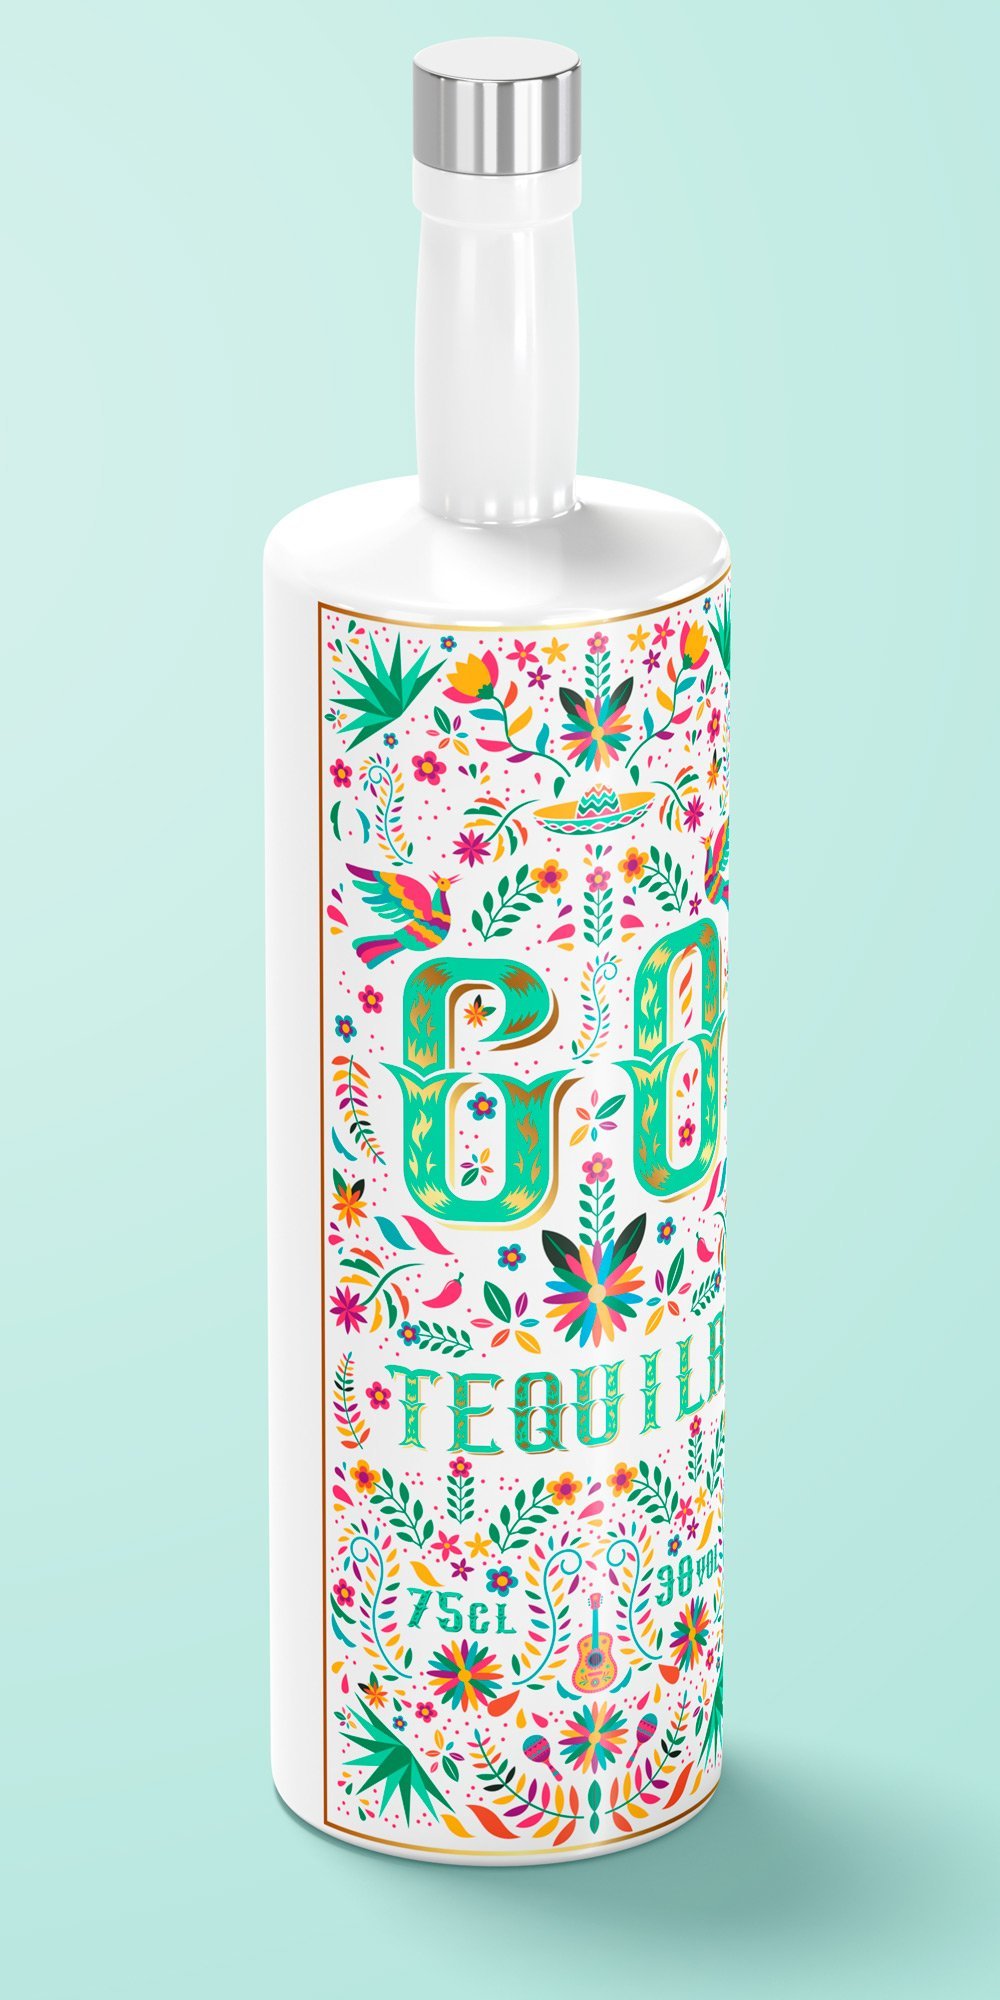 Tequila packaging design